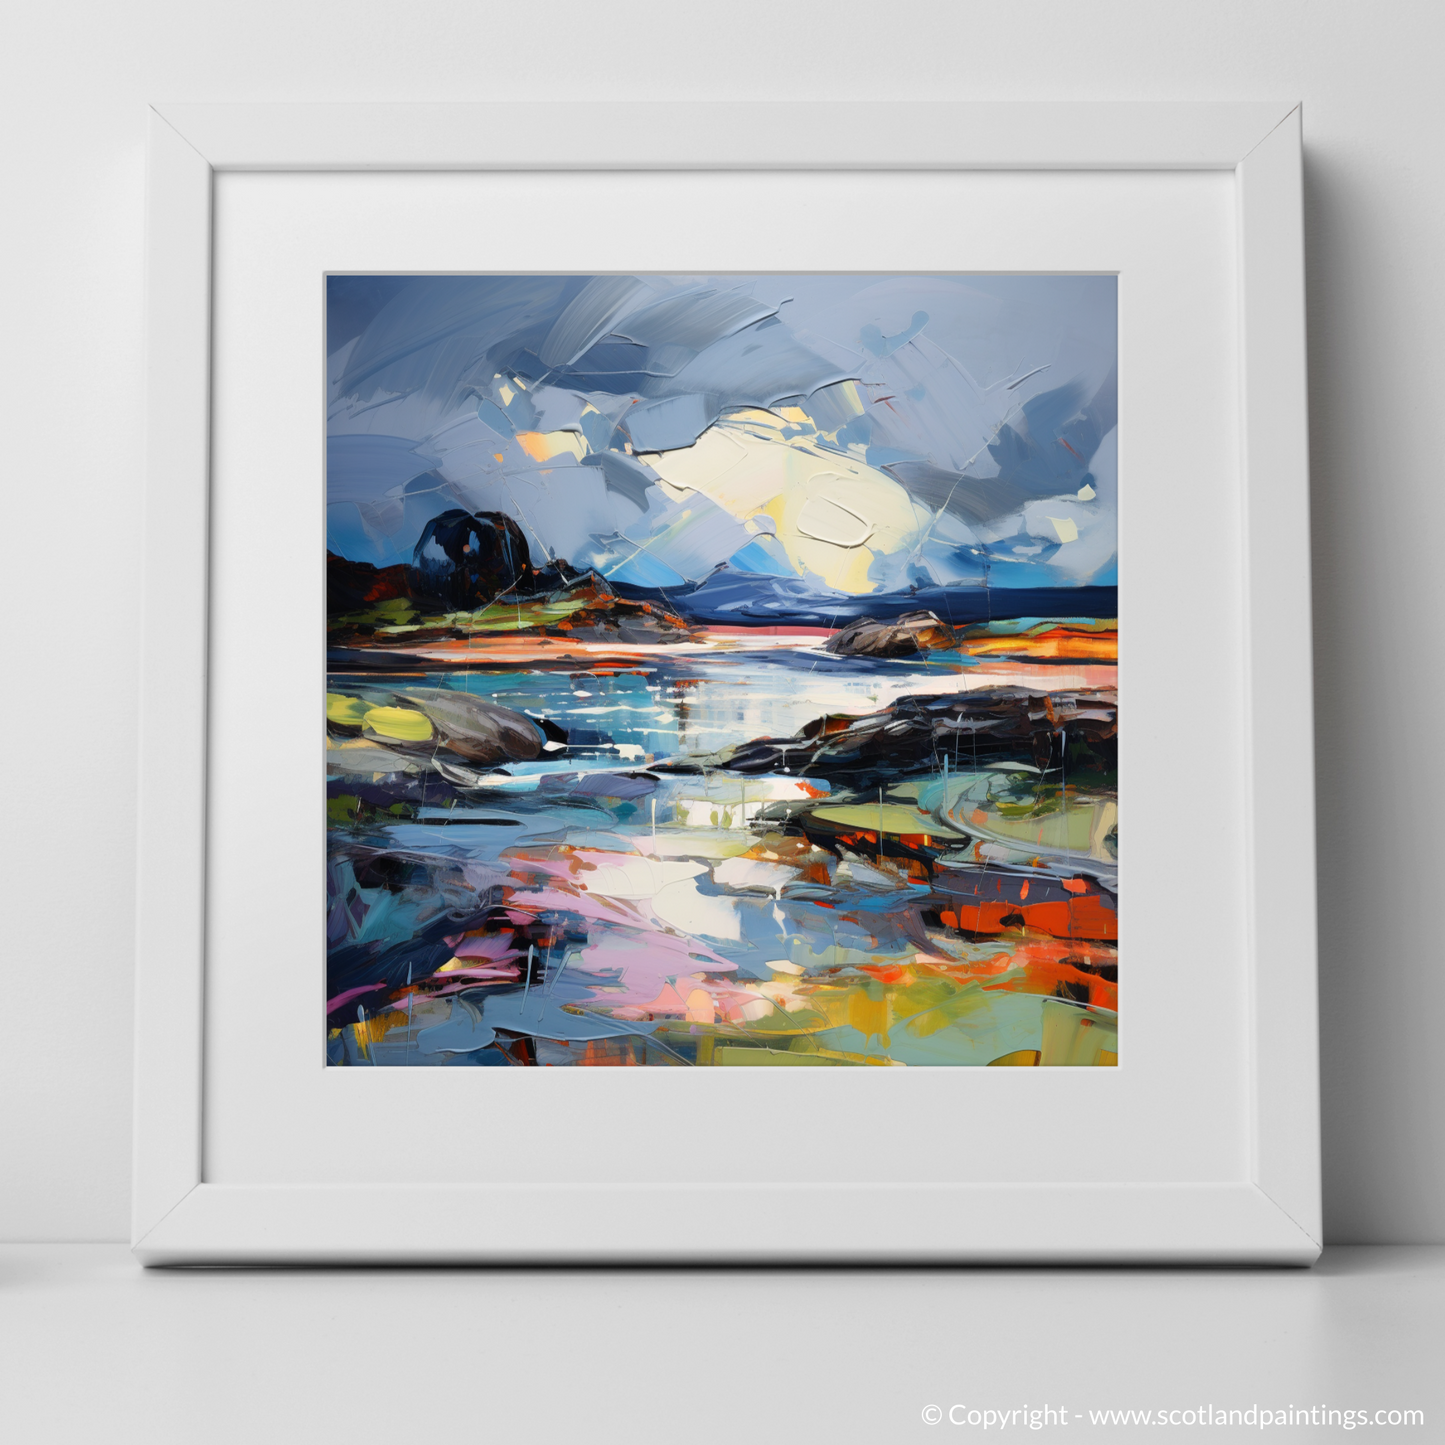 Art Print of Ardtun Bay with a stormy sky with a white frame